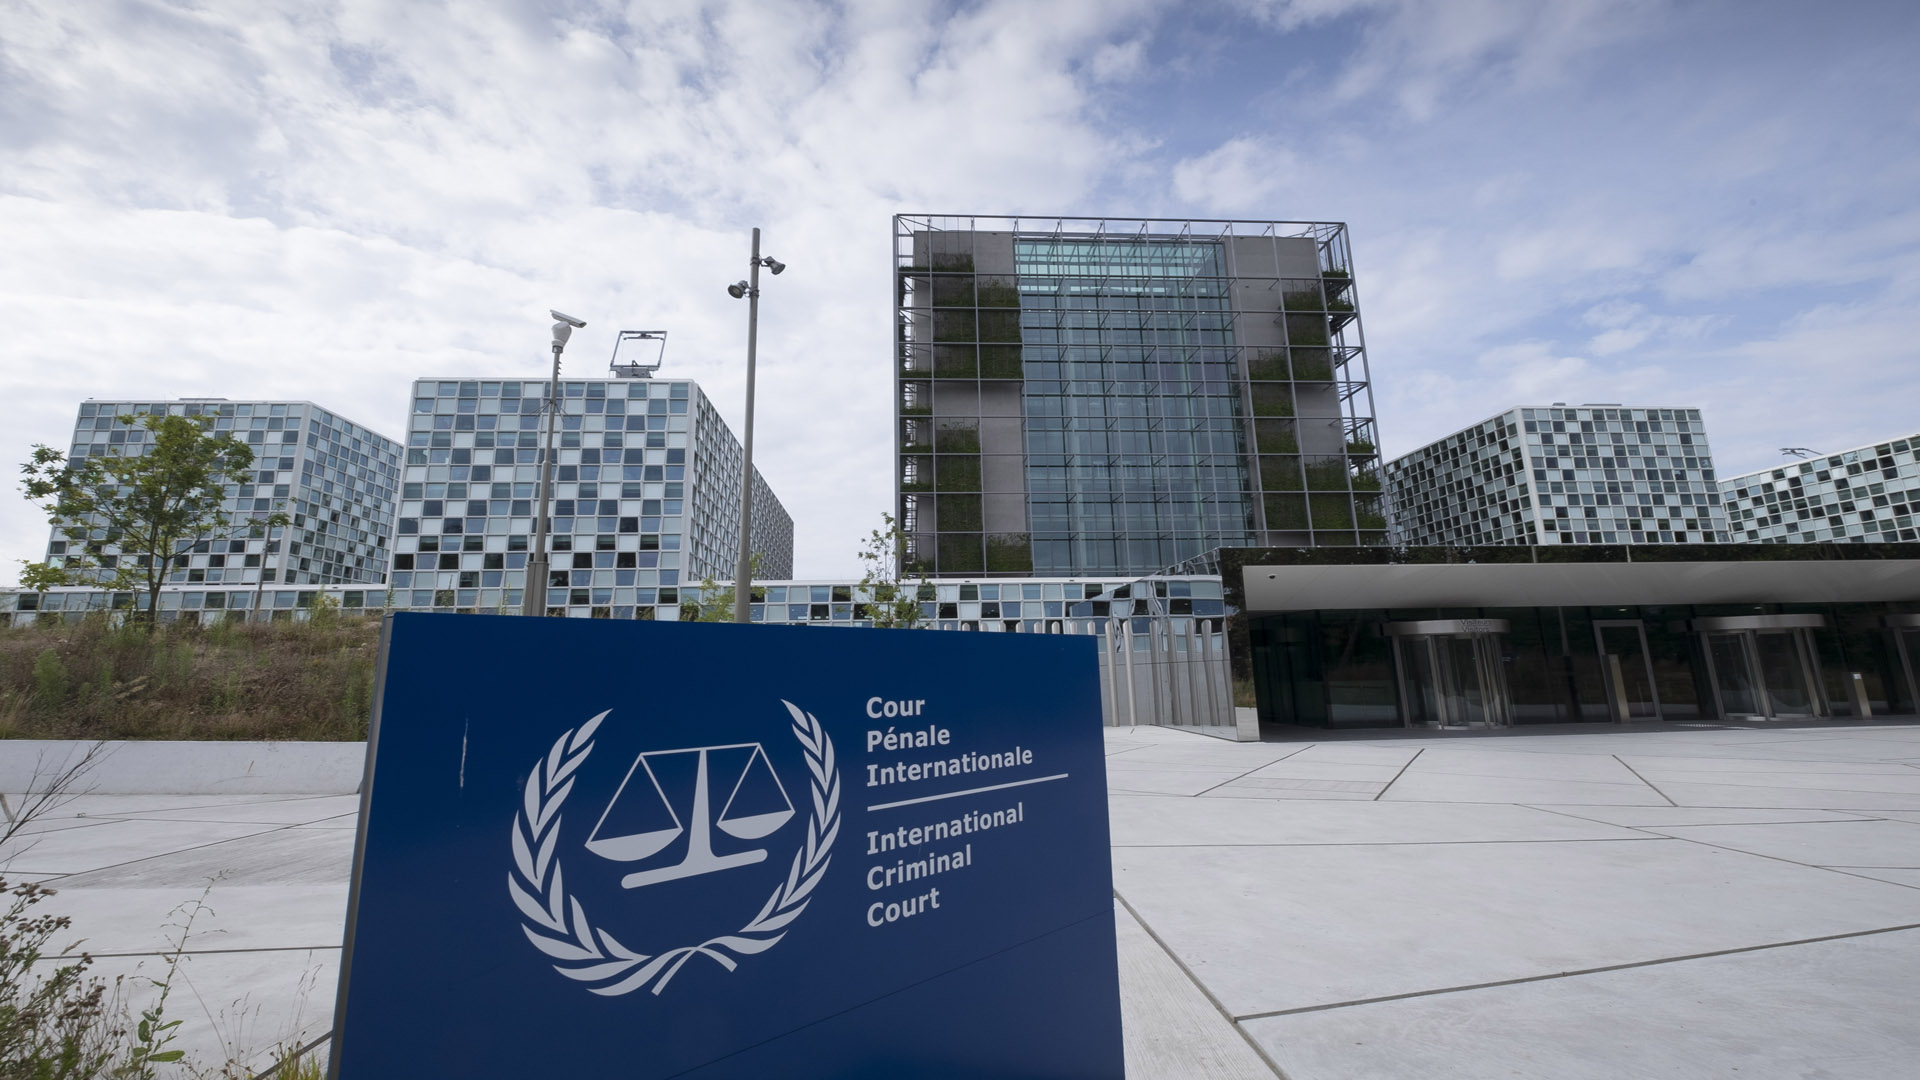 Exterior Views Of New International Criminal Court Building In The Hague